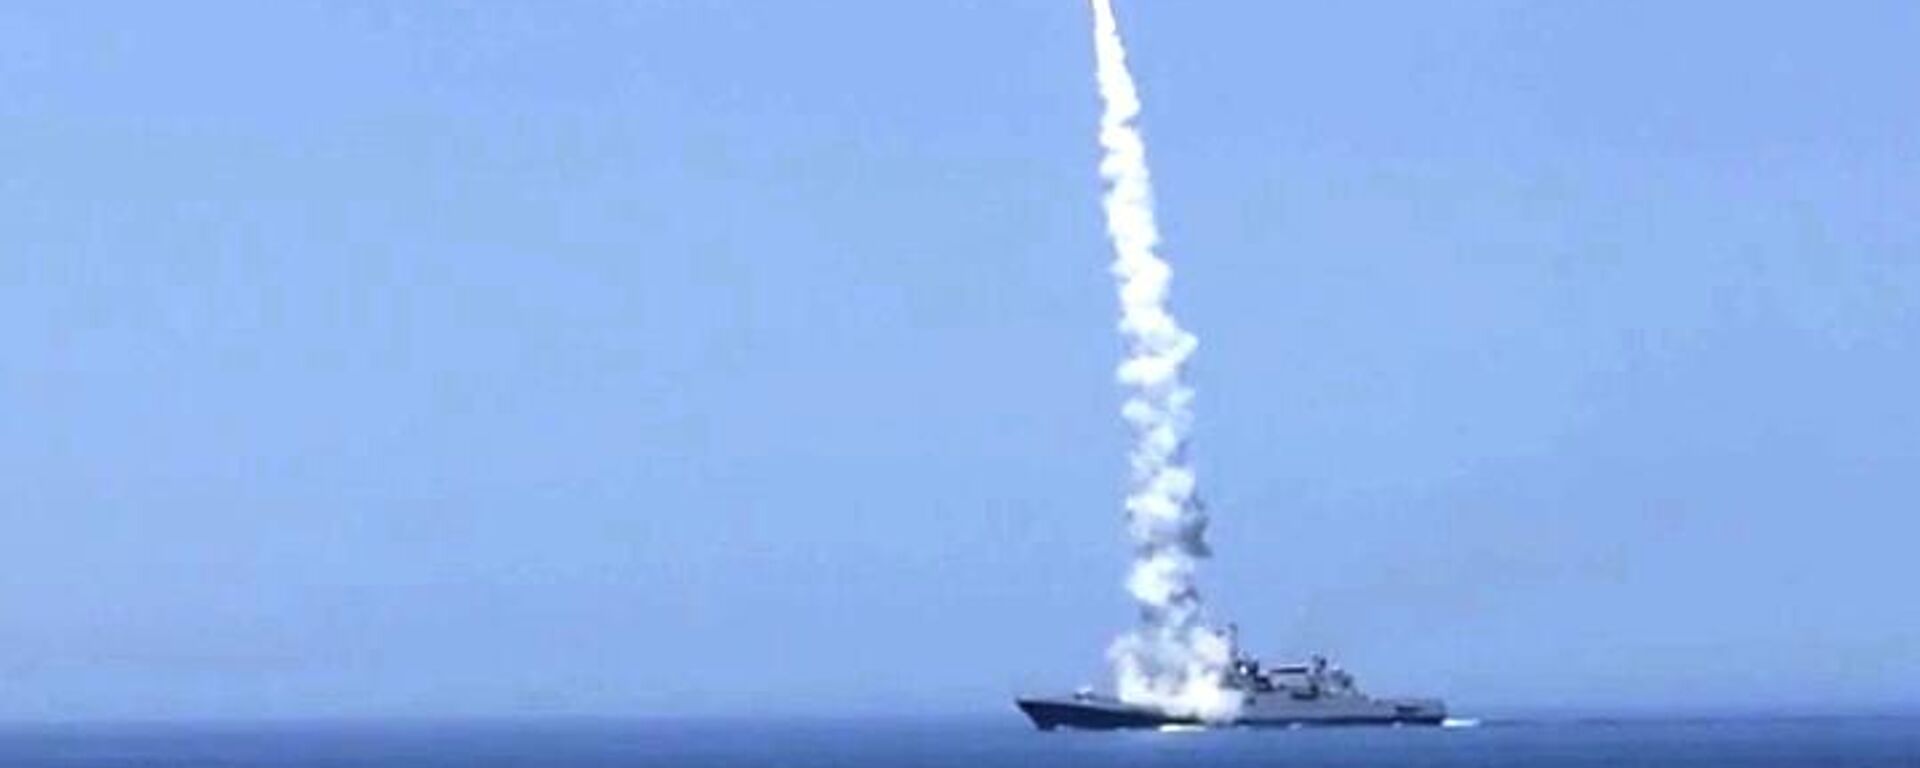 Russian warship fires on Ukrainian military and energy infrastructure targets following attack on Crimean Bridge. October 10, 2022. Screengrab of Russian Ministry of Defense video. - Sputnik International, 1920, 10.10.2022